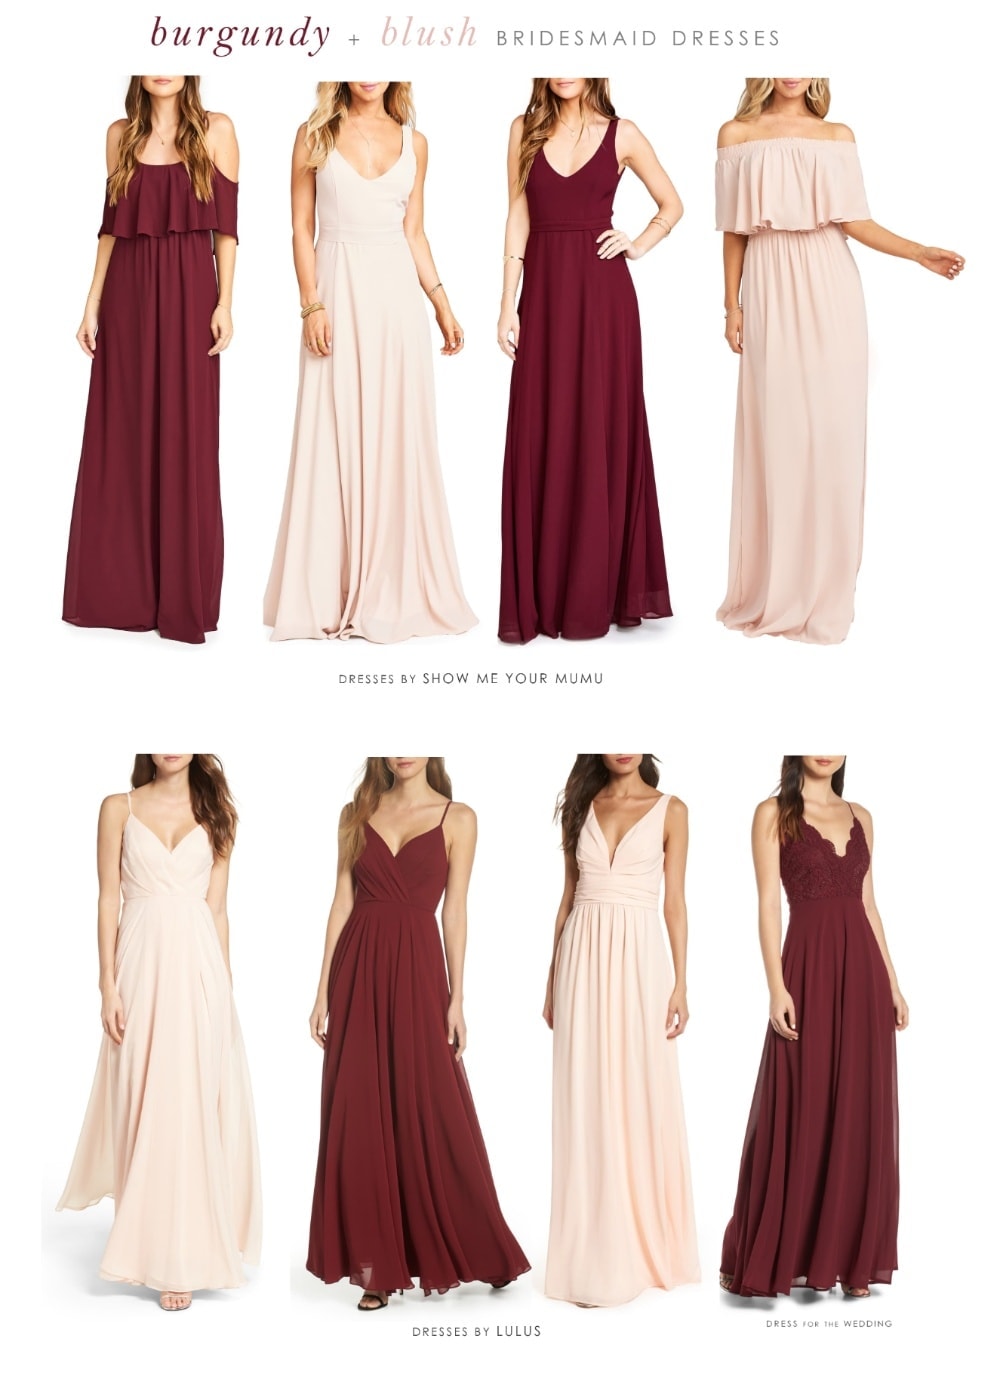 blush bridesmaid dresses with sleeves